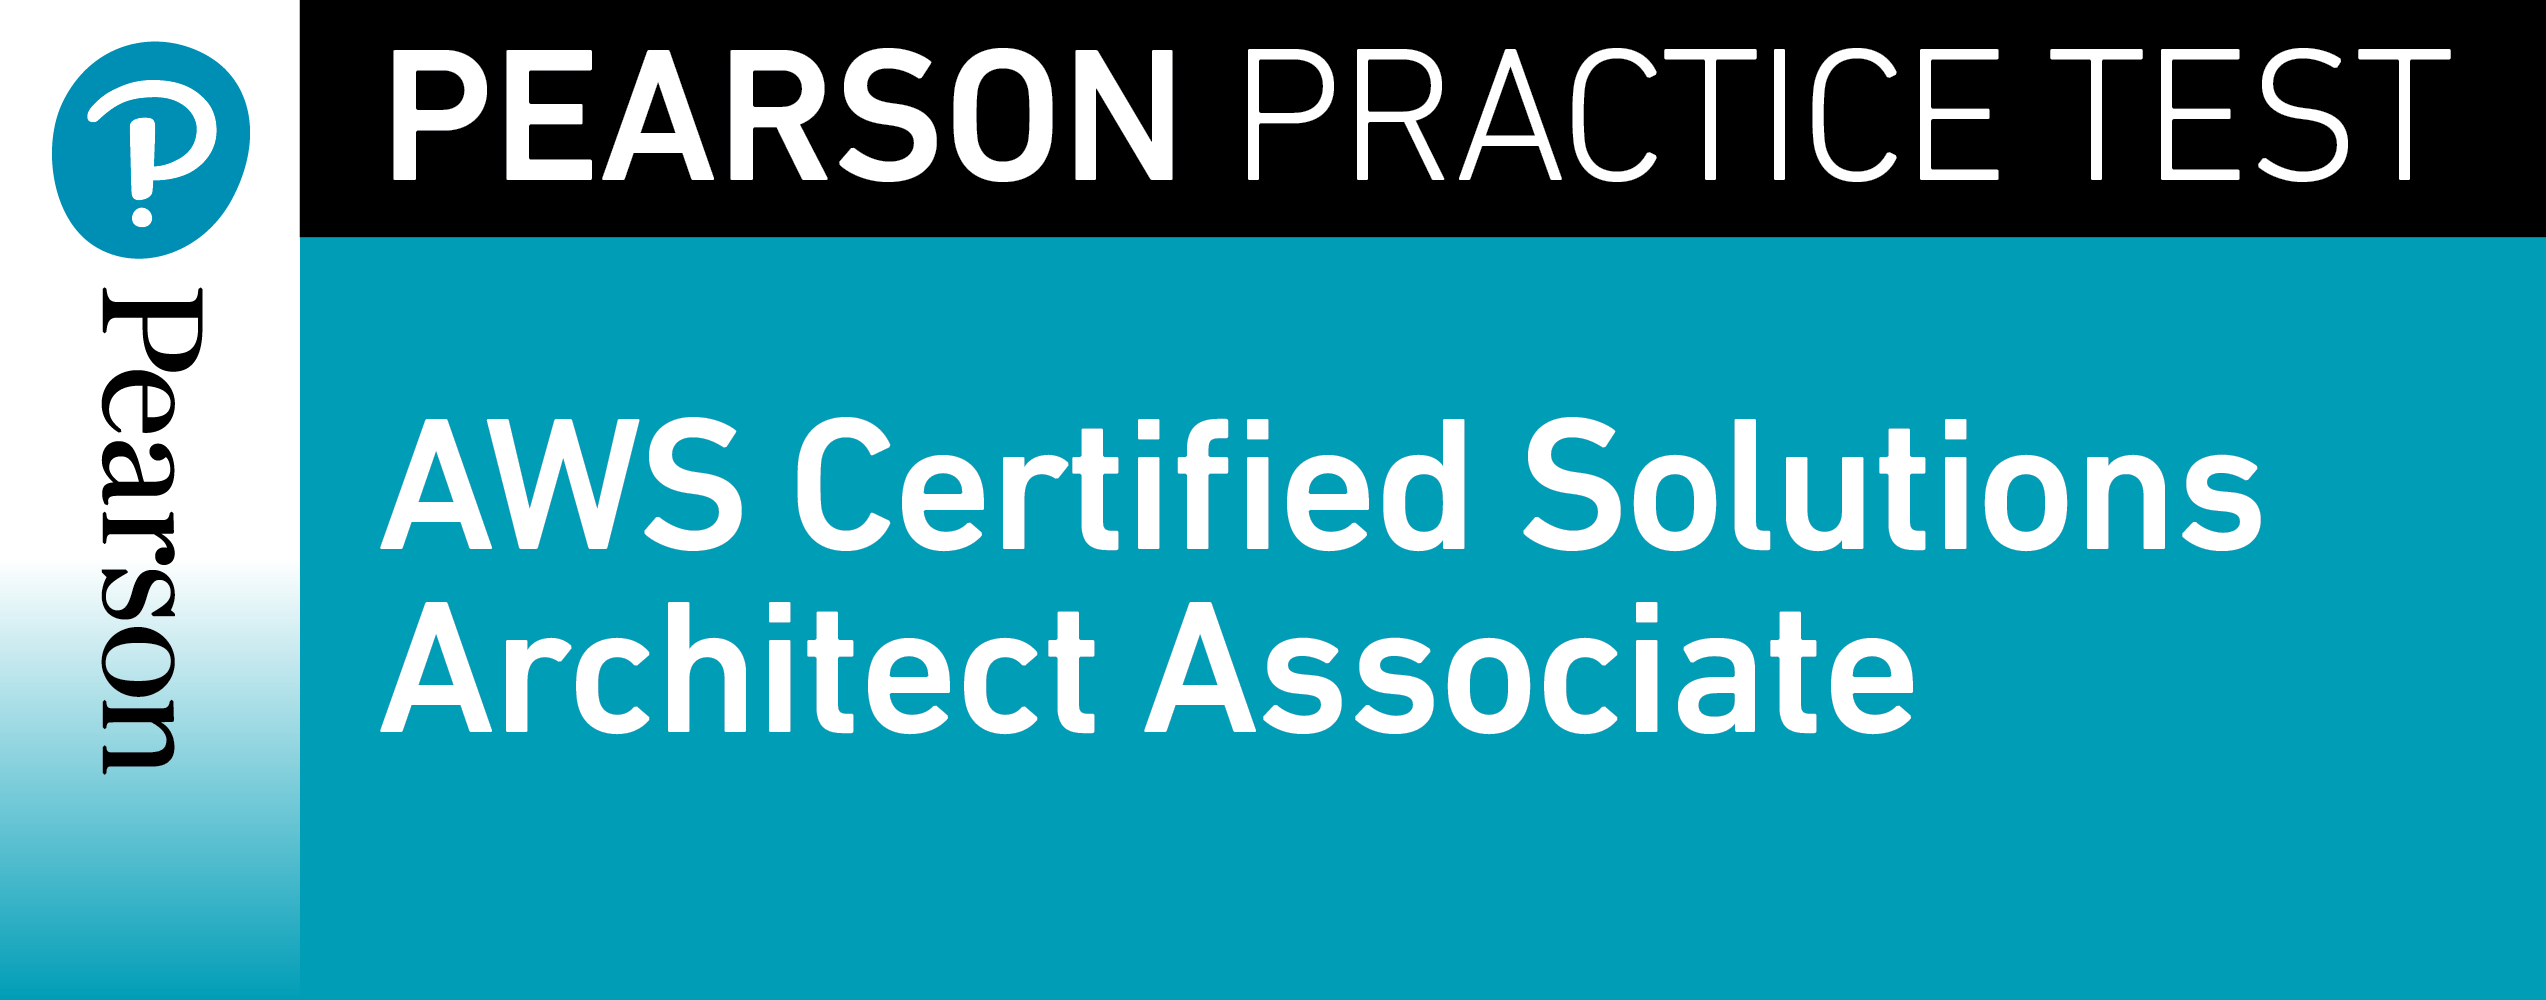 AWS Certified Solutions Architect Associate (Pearson Practice Test)